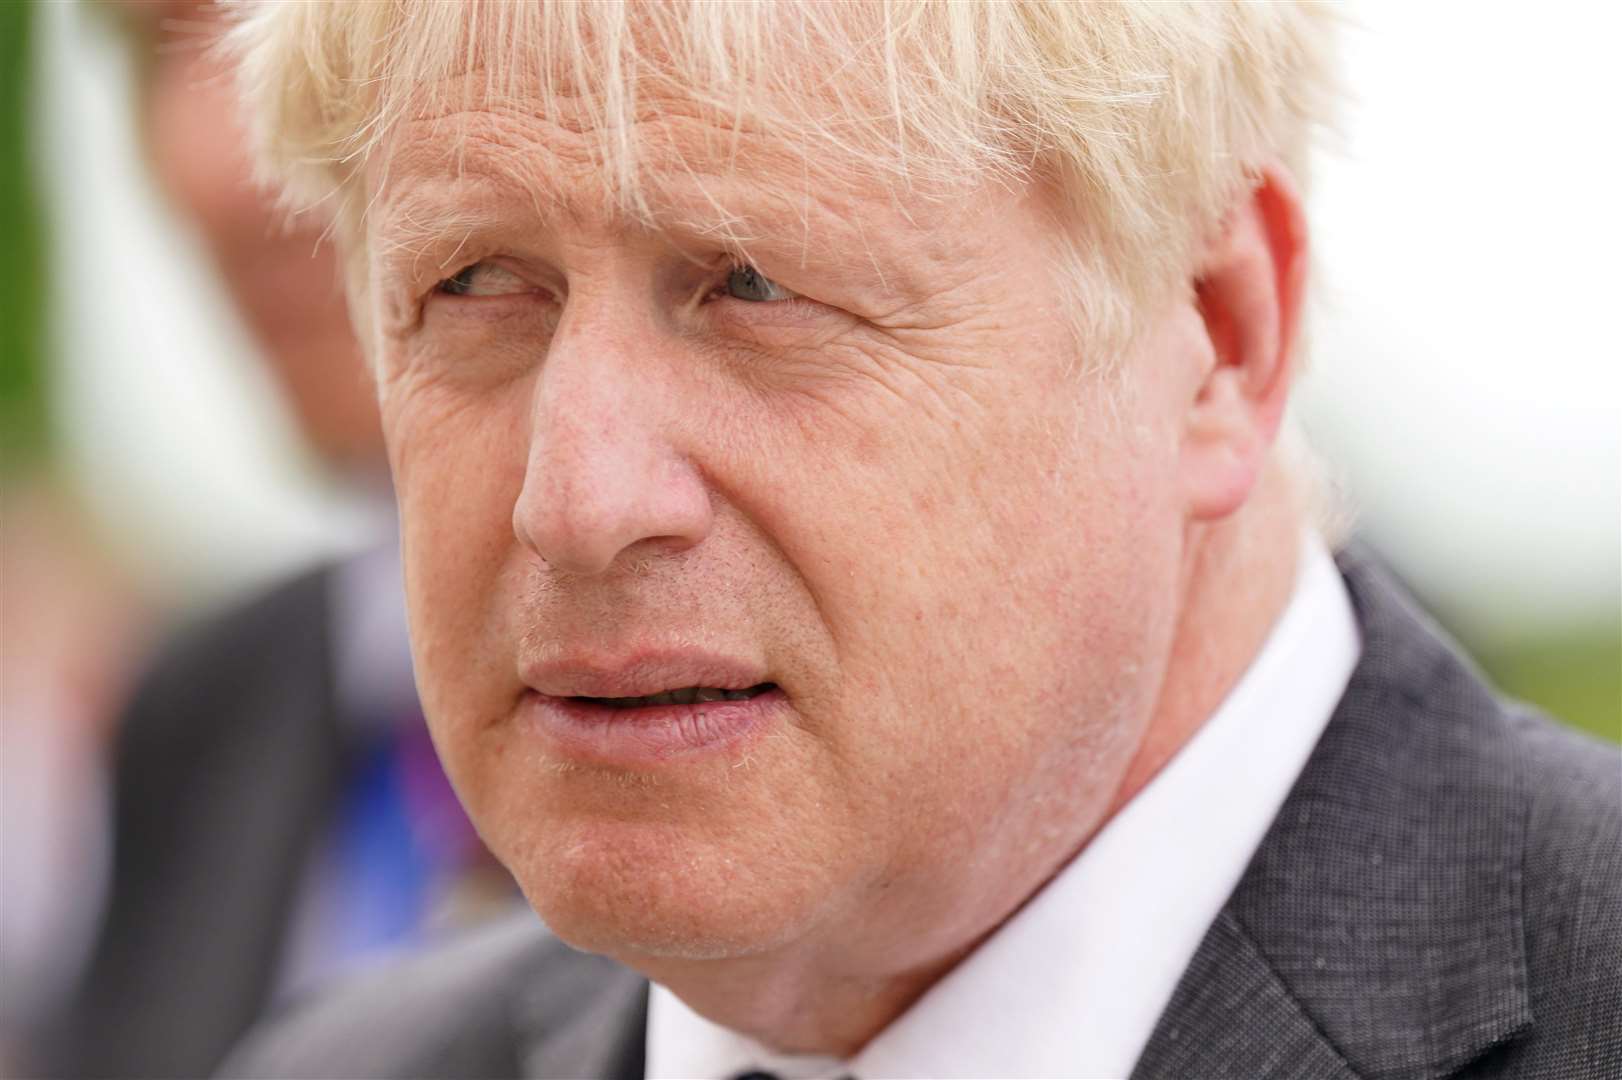 Boris Johnson has been clear he will not sanction a second referendum on Scottish independence (Jacob King/PA)